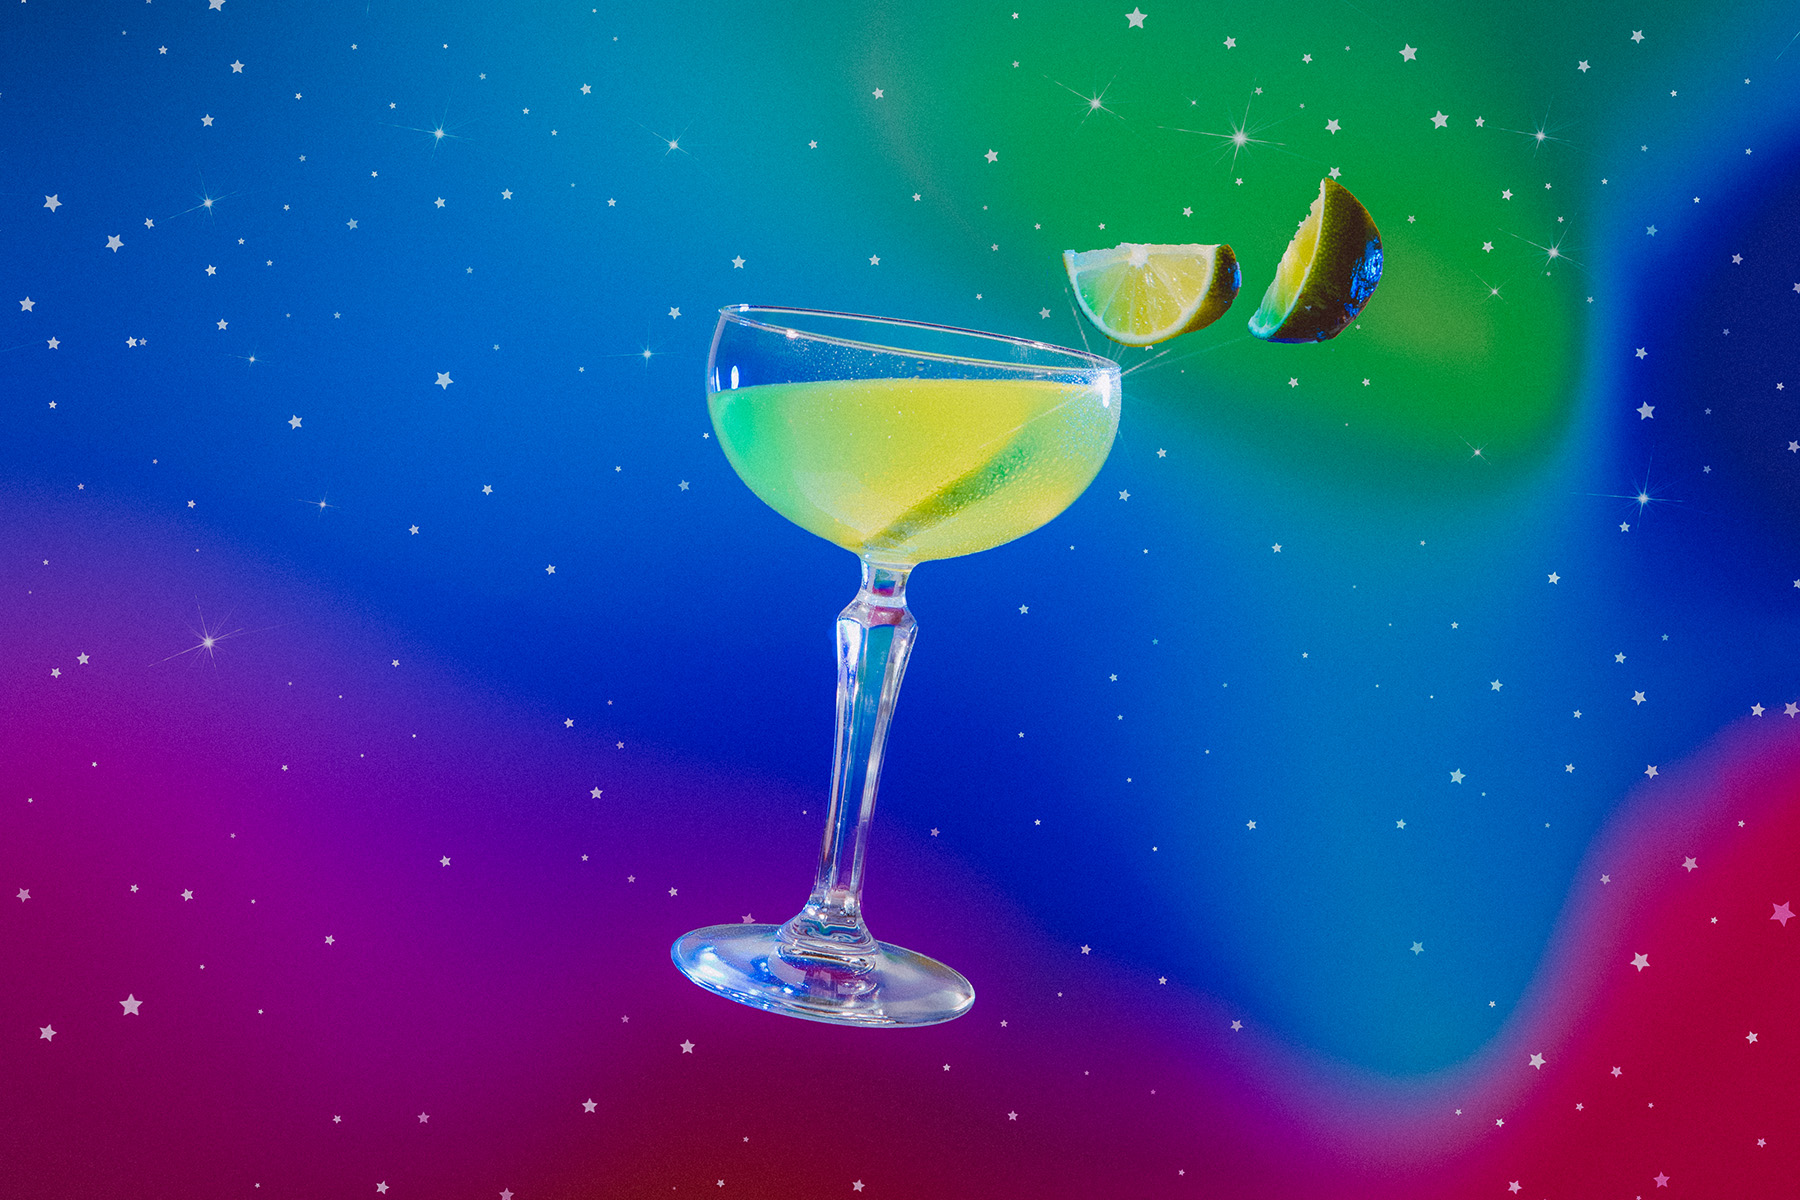 virgo inspired gin, chartreuse, maraschino liqueur, and lime juice cocktail with floating lime slices in cosmic surroundings